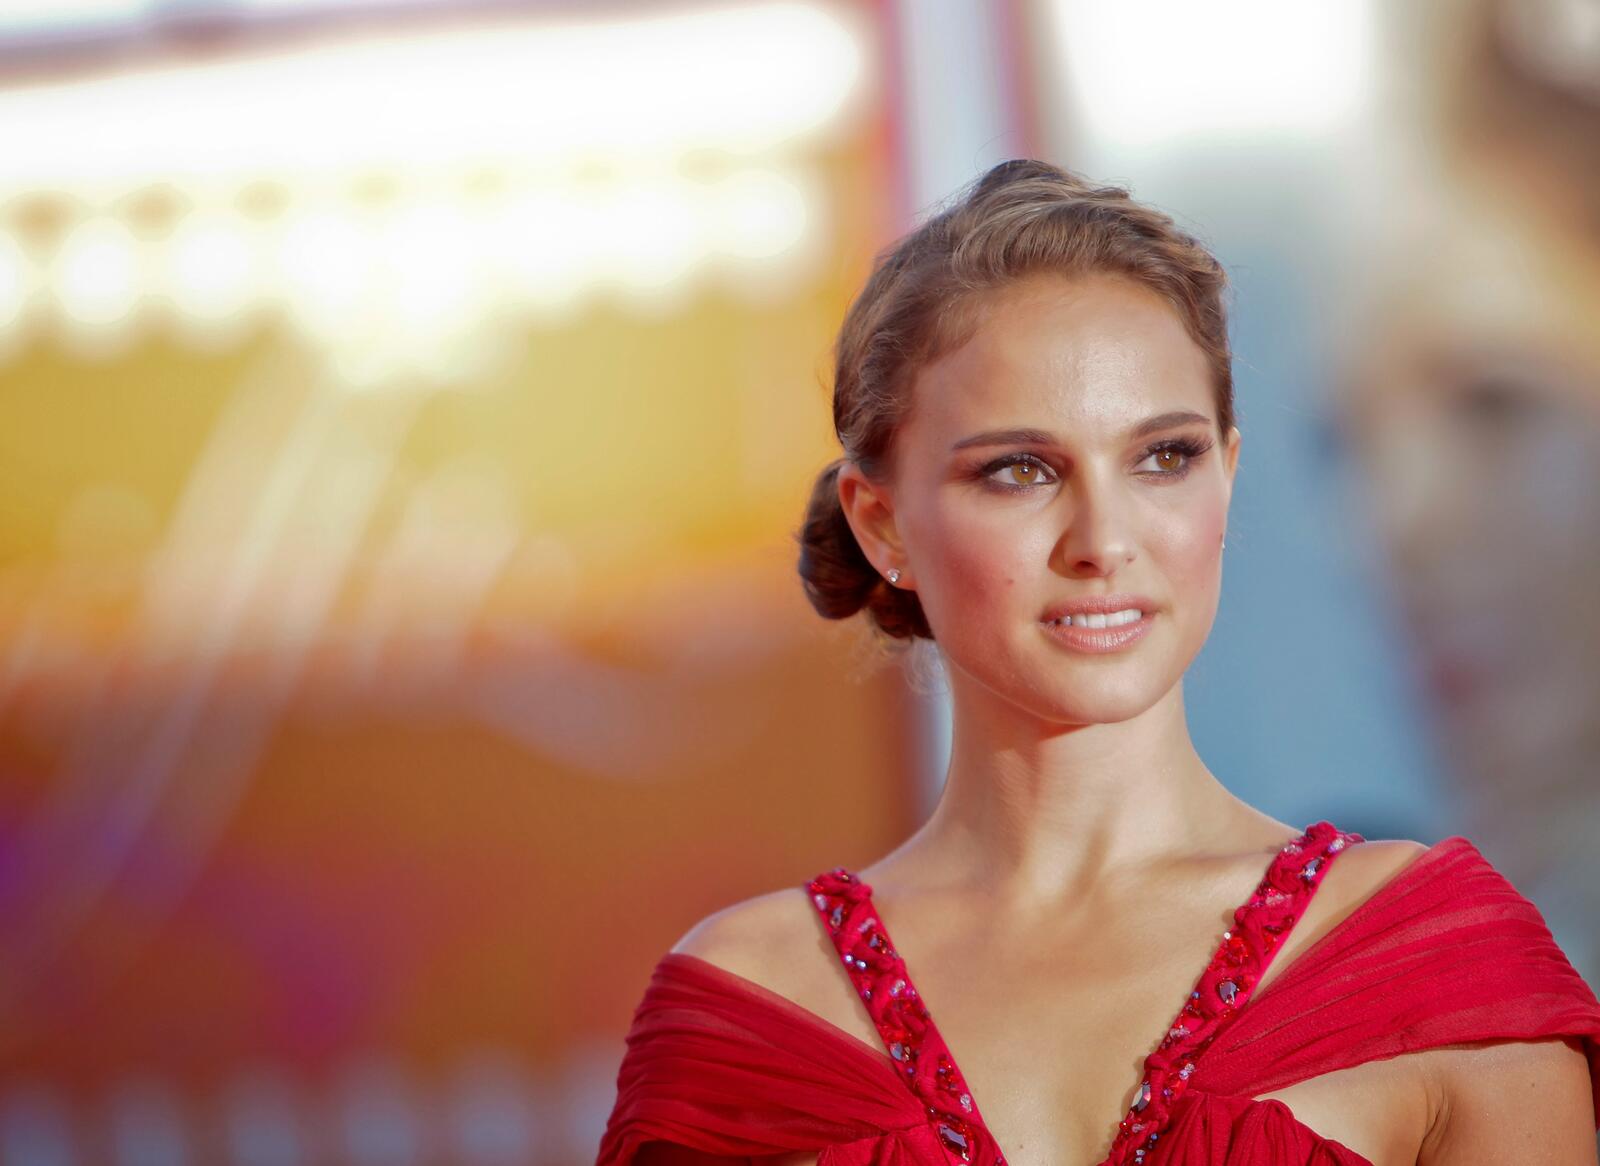 Free photo Natalie Portman poses for the camera in a red dress